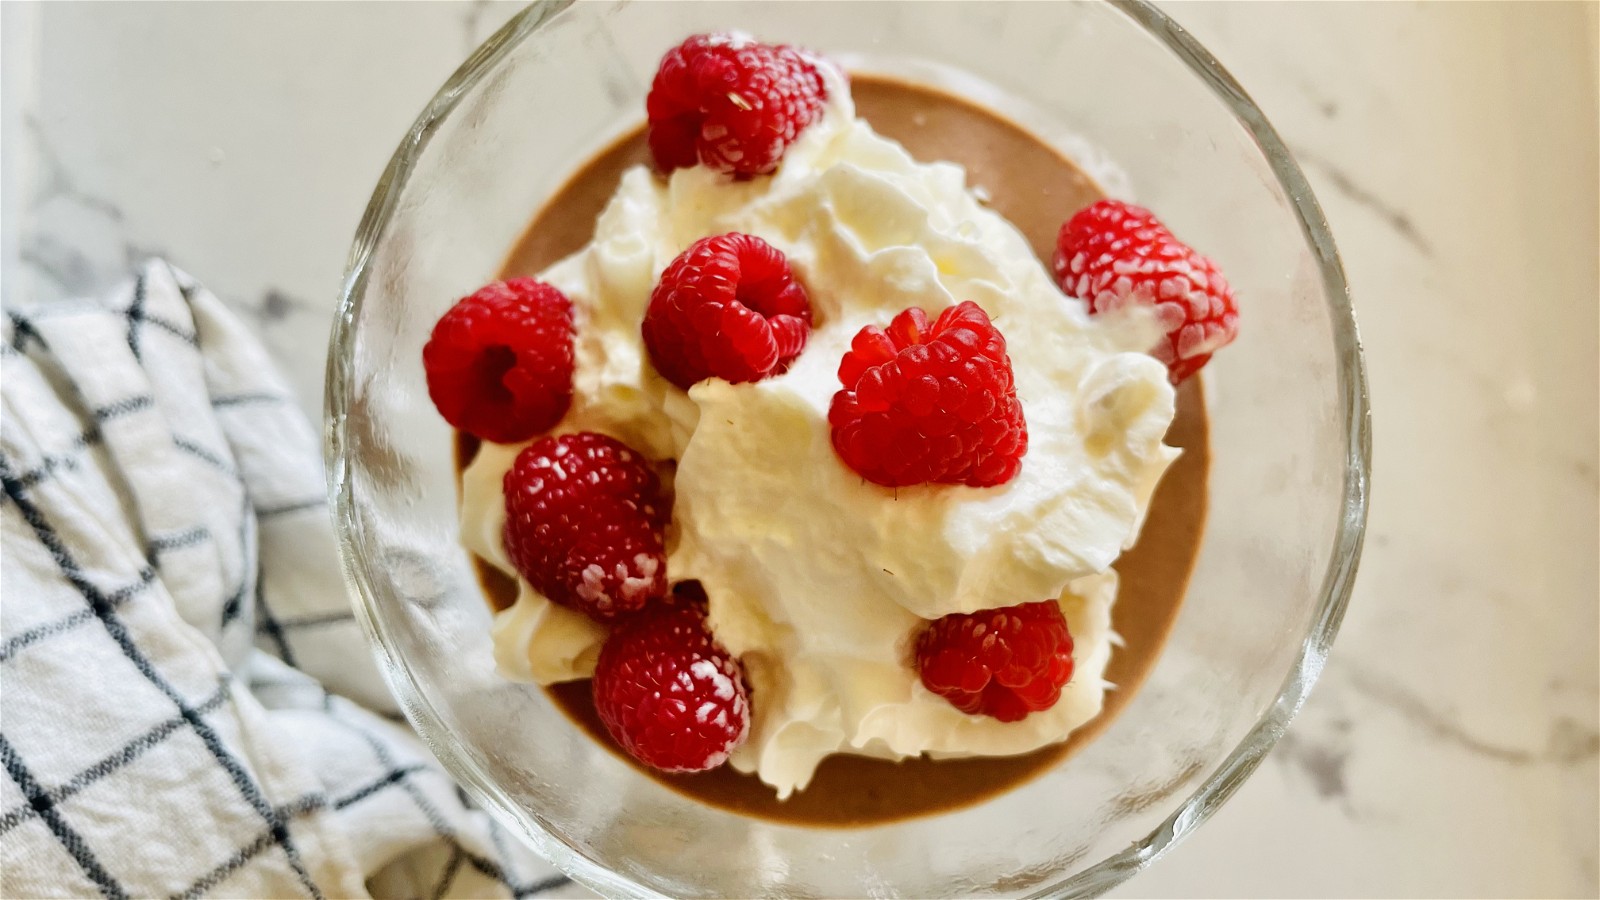 Image of Healthy, Chocolate Mousse